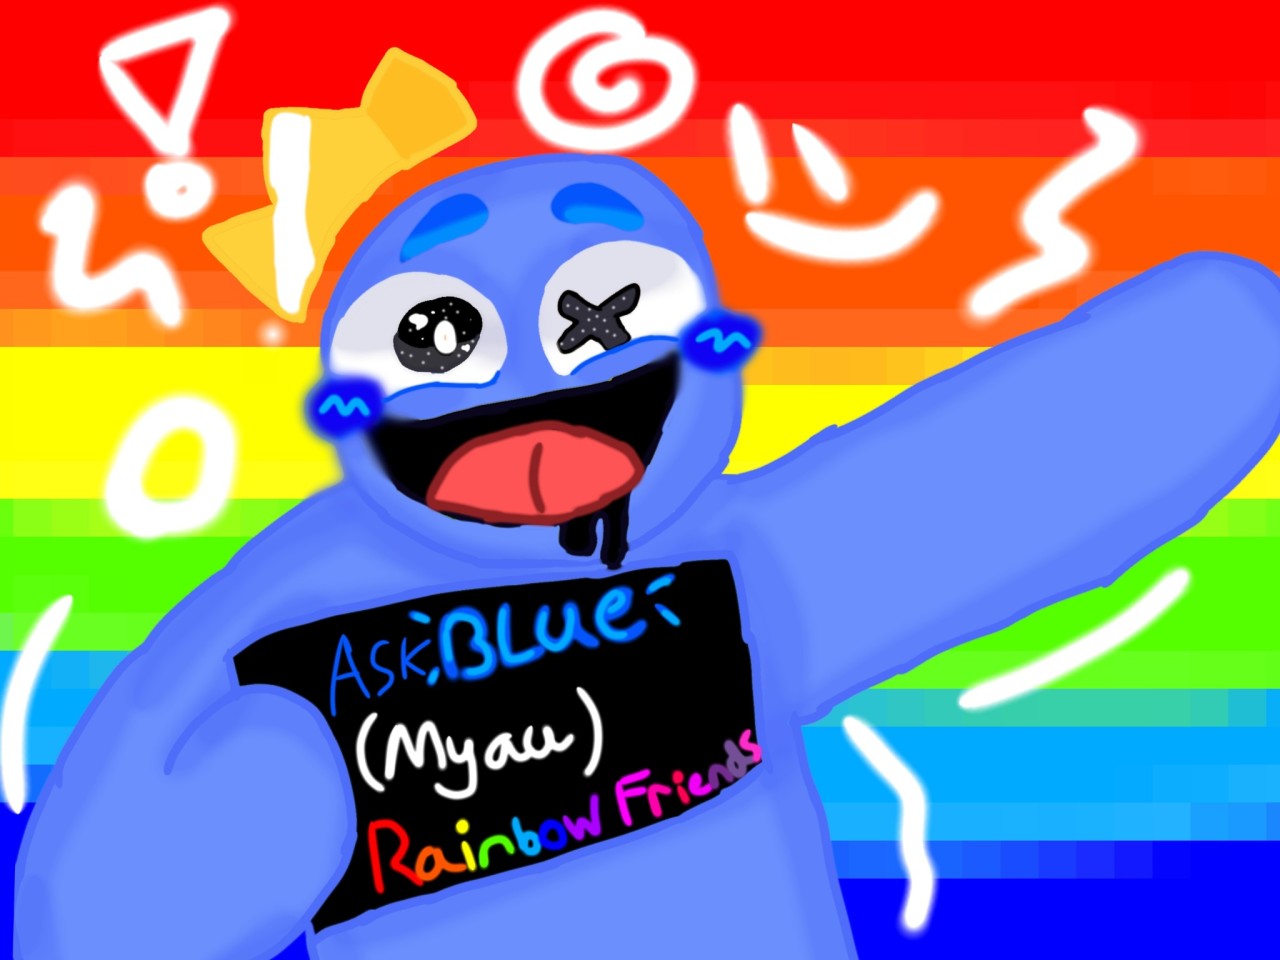 I love AlgeBRUH.yum yum — Q and A!ASK BLUE!( 88 followers special!)